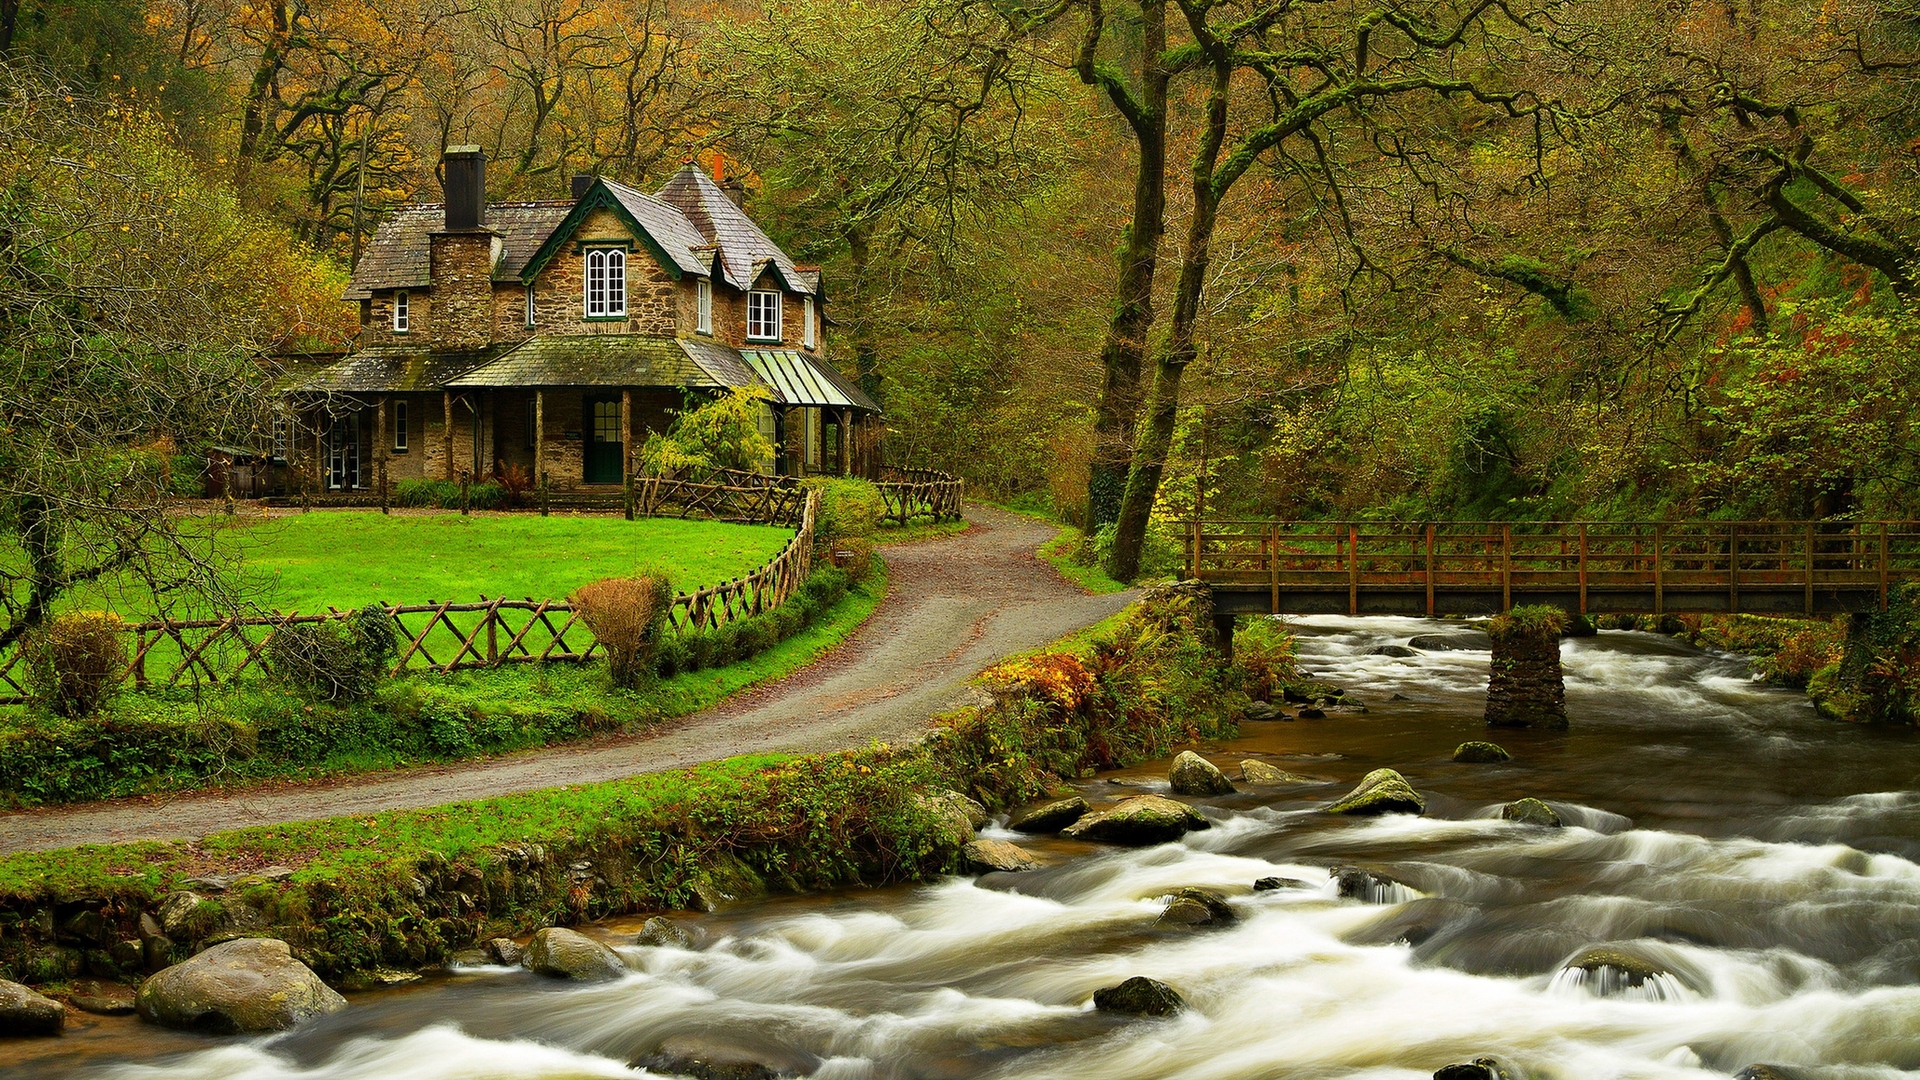 House In The Woods 1920 X 1080 Hdtv 1080p Wallpaper